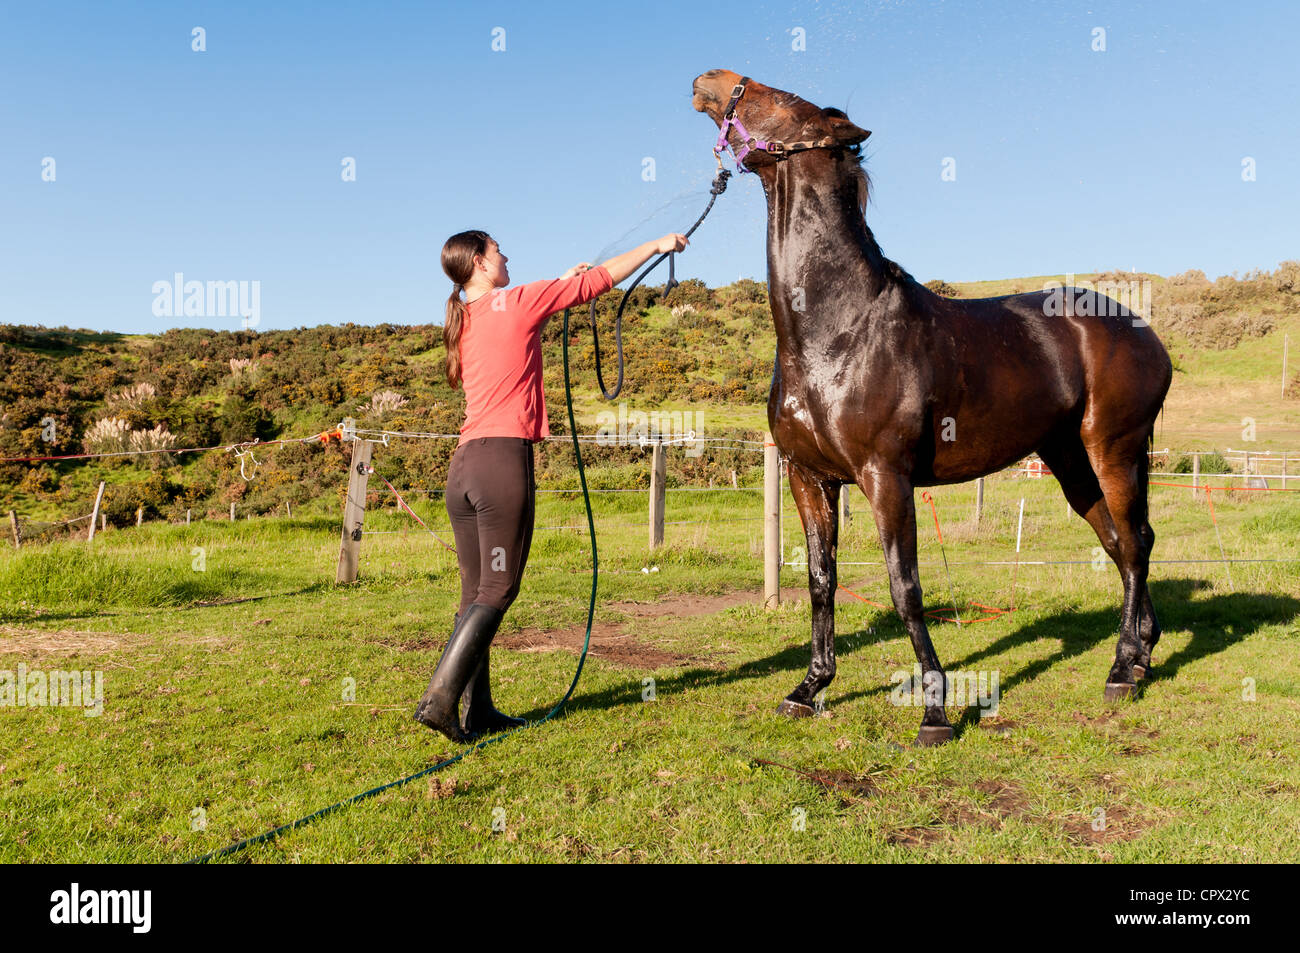 Mid adult woman washing horse with hosepipe Stock Photo